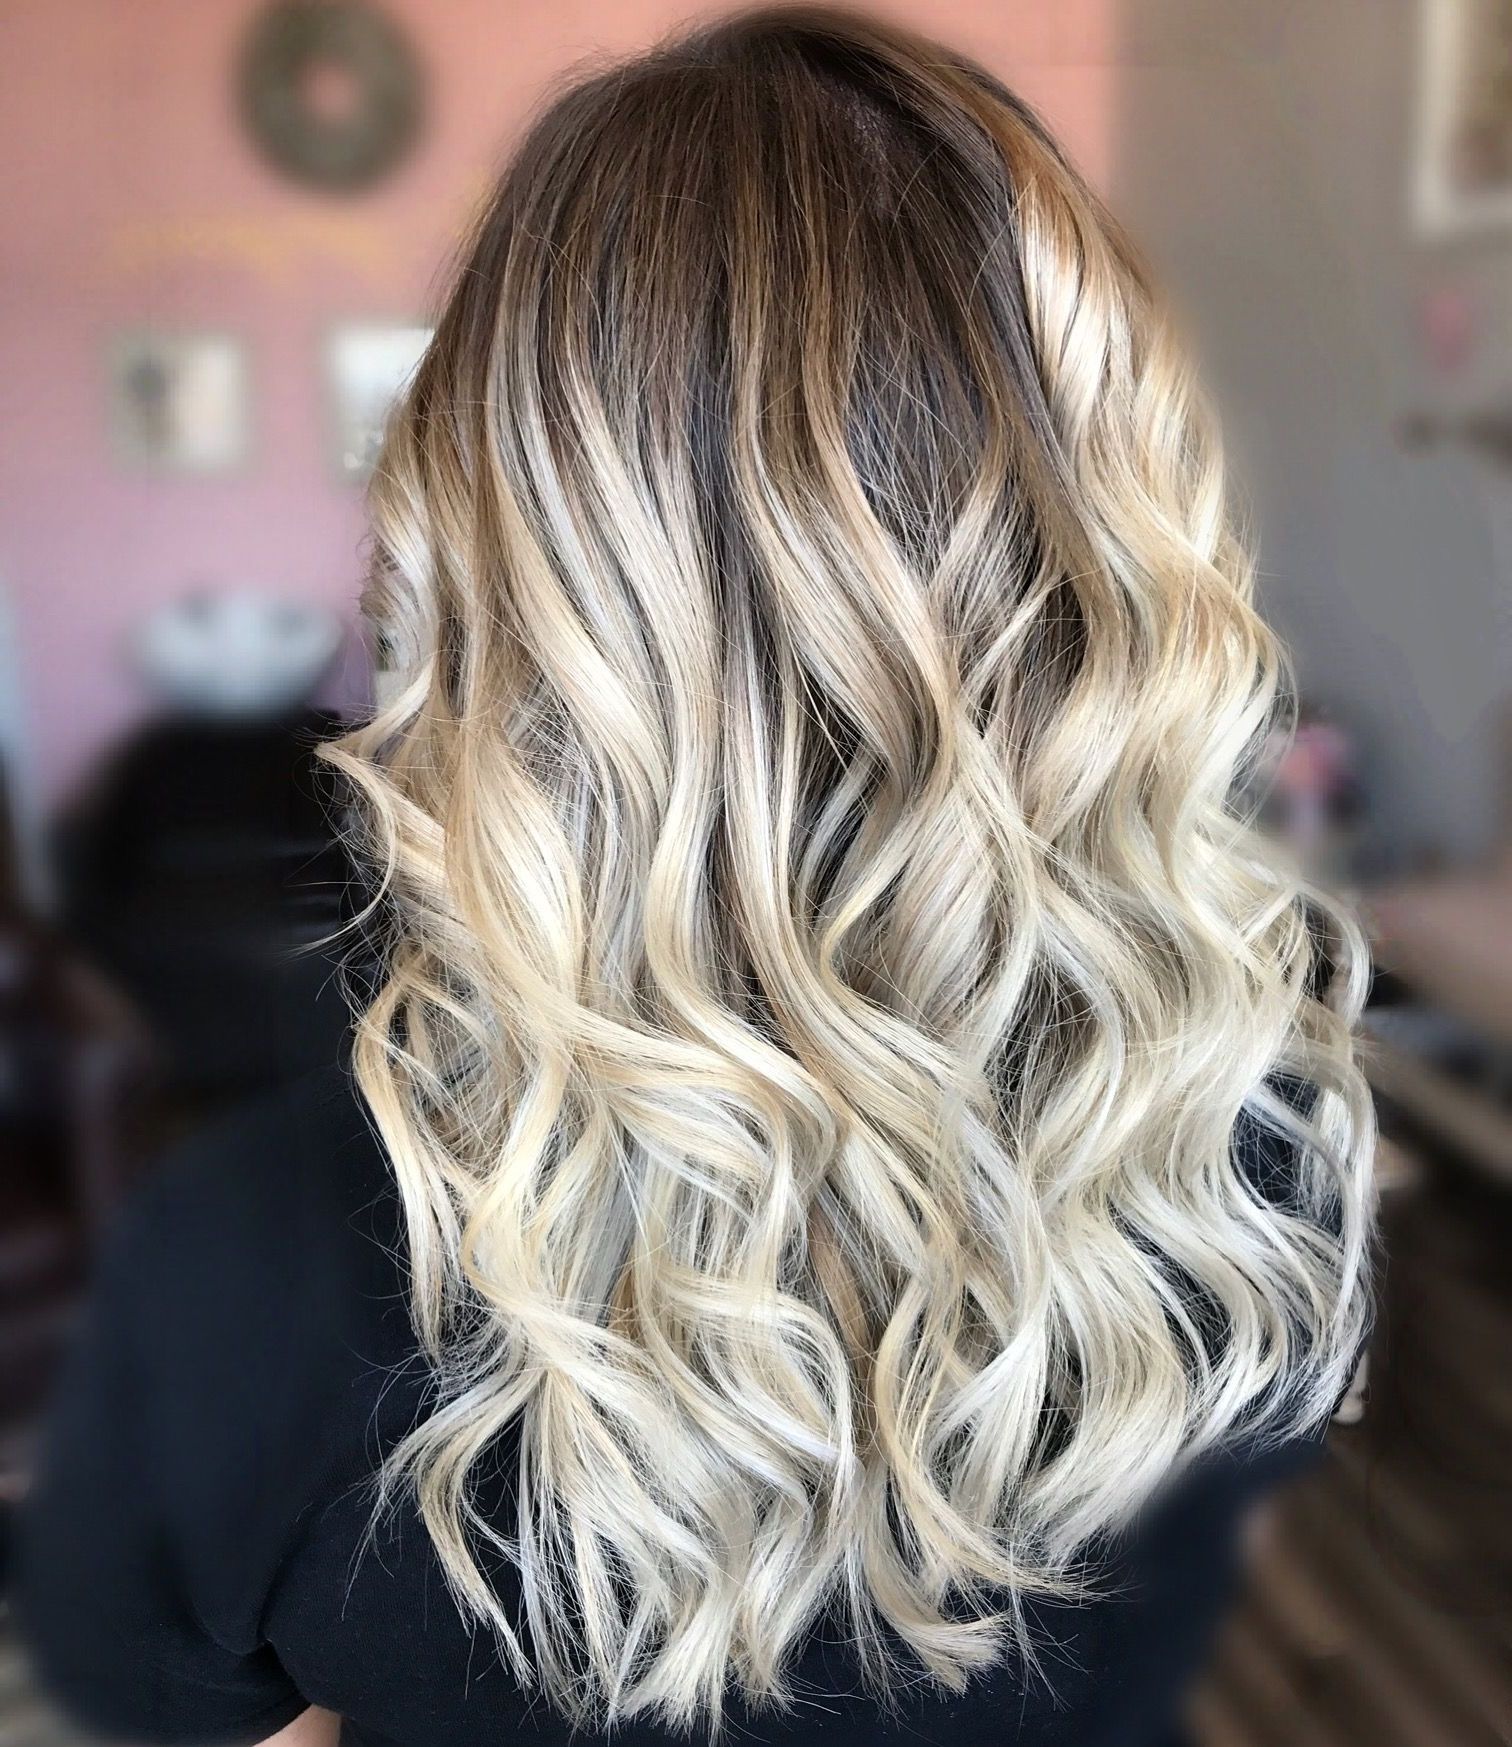 Icy Blonde Balayage, Hair Styles Regarding Best And Newest Blonde Balayage On Long Voluminous Hairstyles (View 14 of 20)